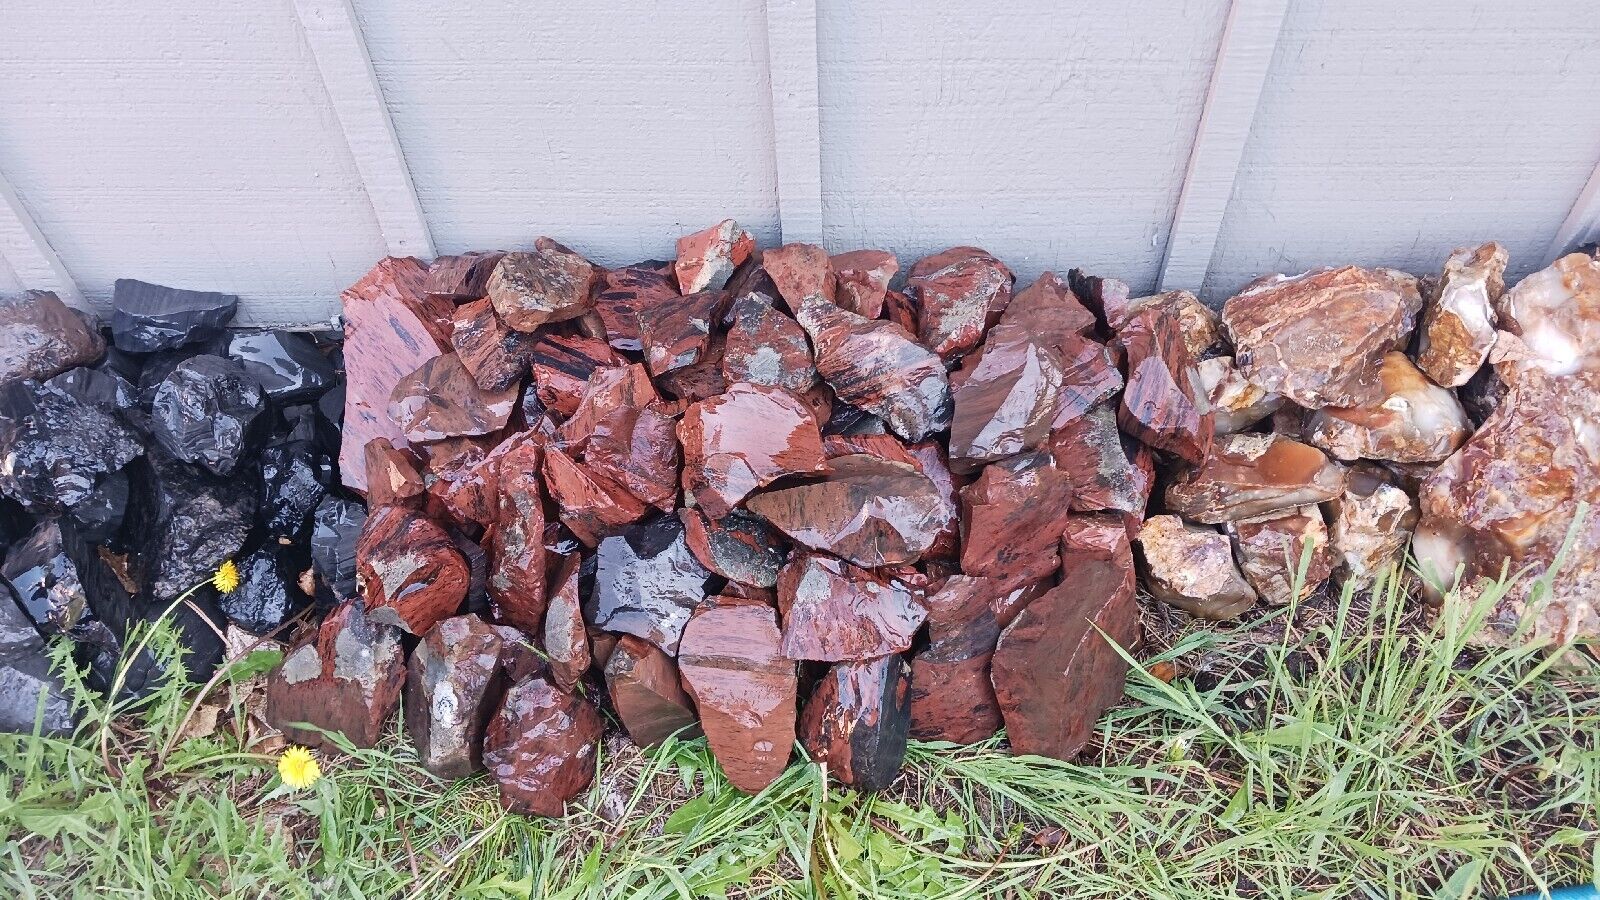 20 pounds of different types of Black & Brown obsidian rough rock for knapping 